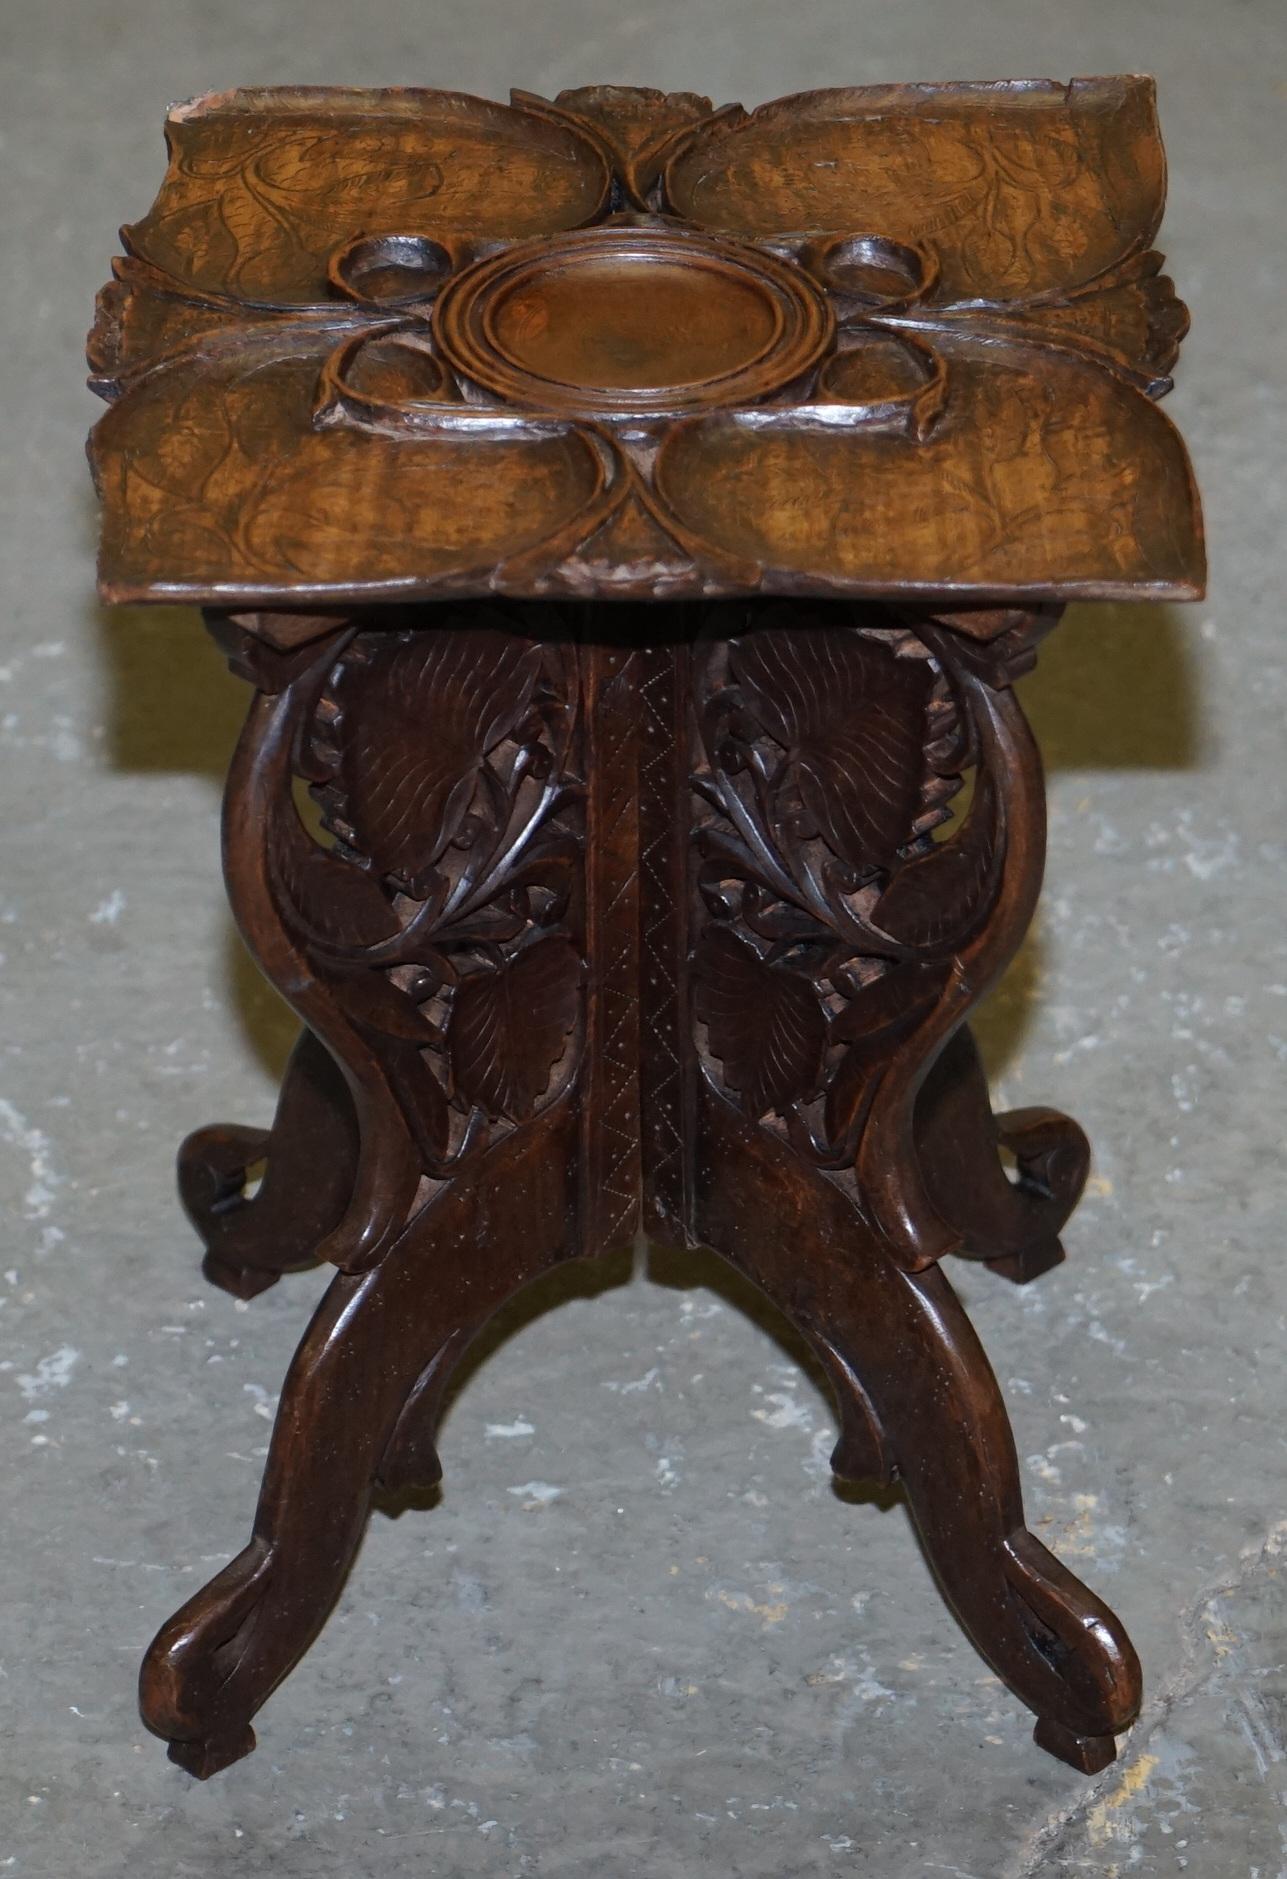 We are delighted to offer for sale this stunning hand carved Anglo Burmese 19th century hardwood folding side table

A very good looking well made and decorative table, its hand carved from head to toe and looks like pure art furniture from every